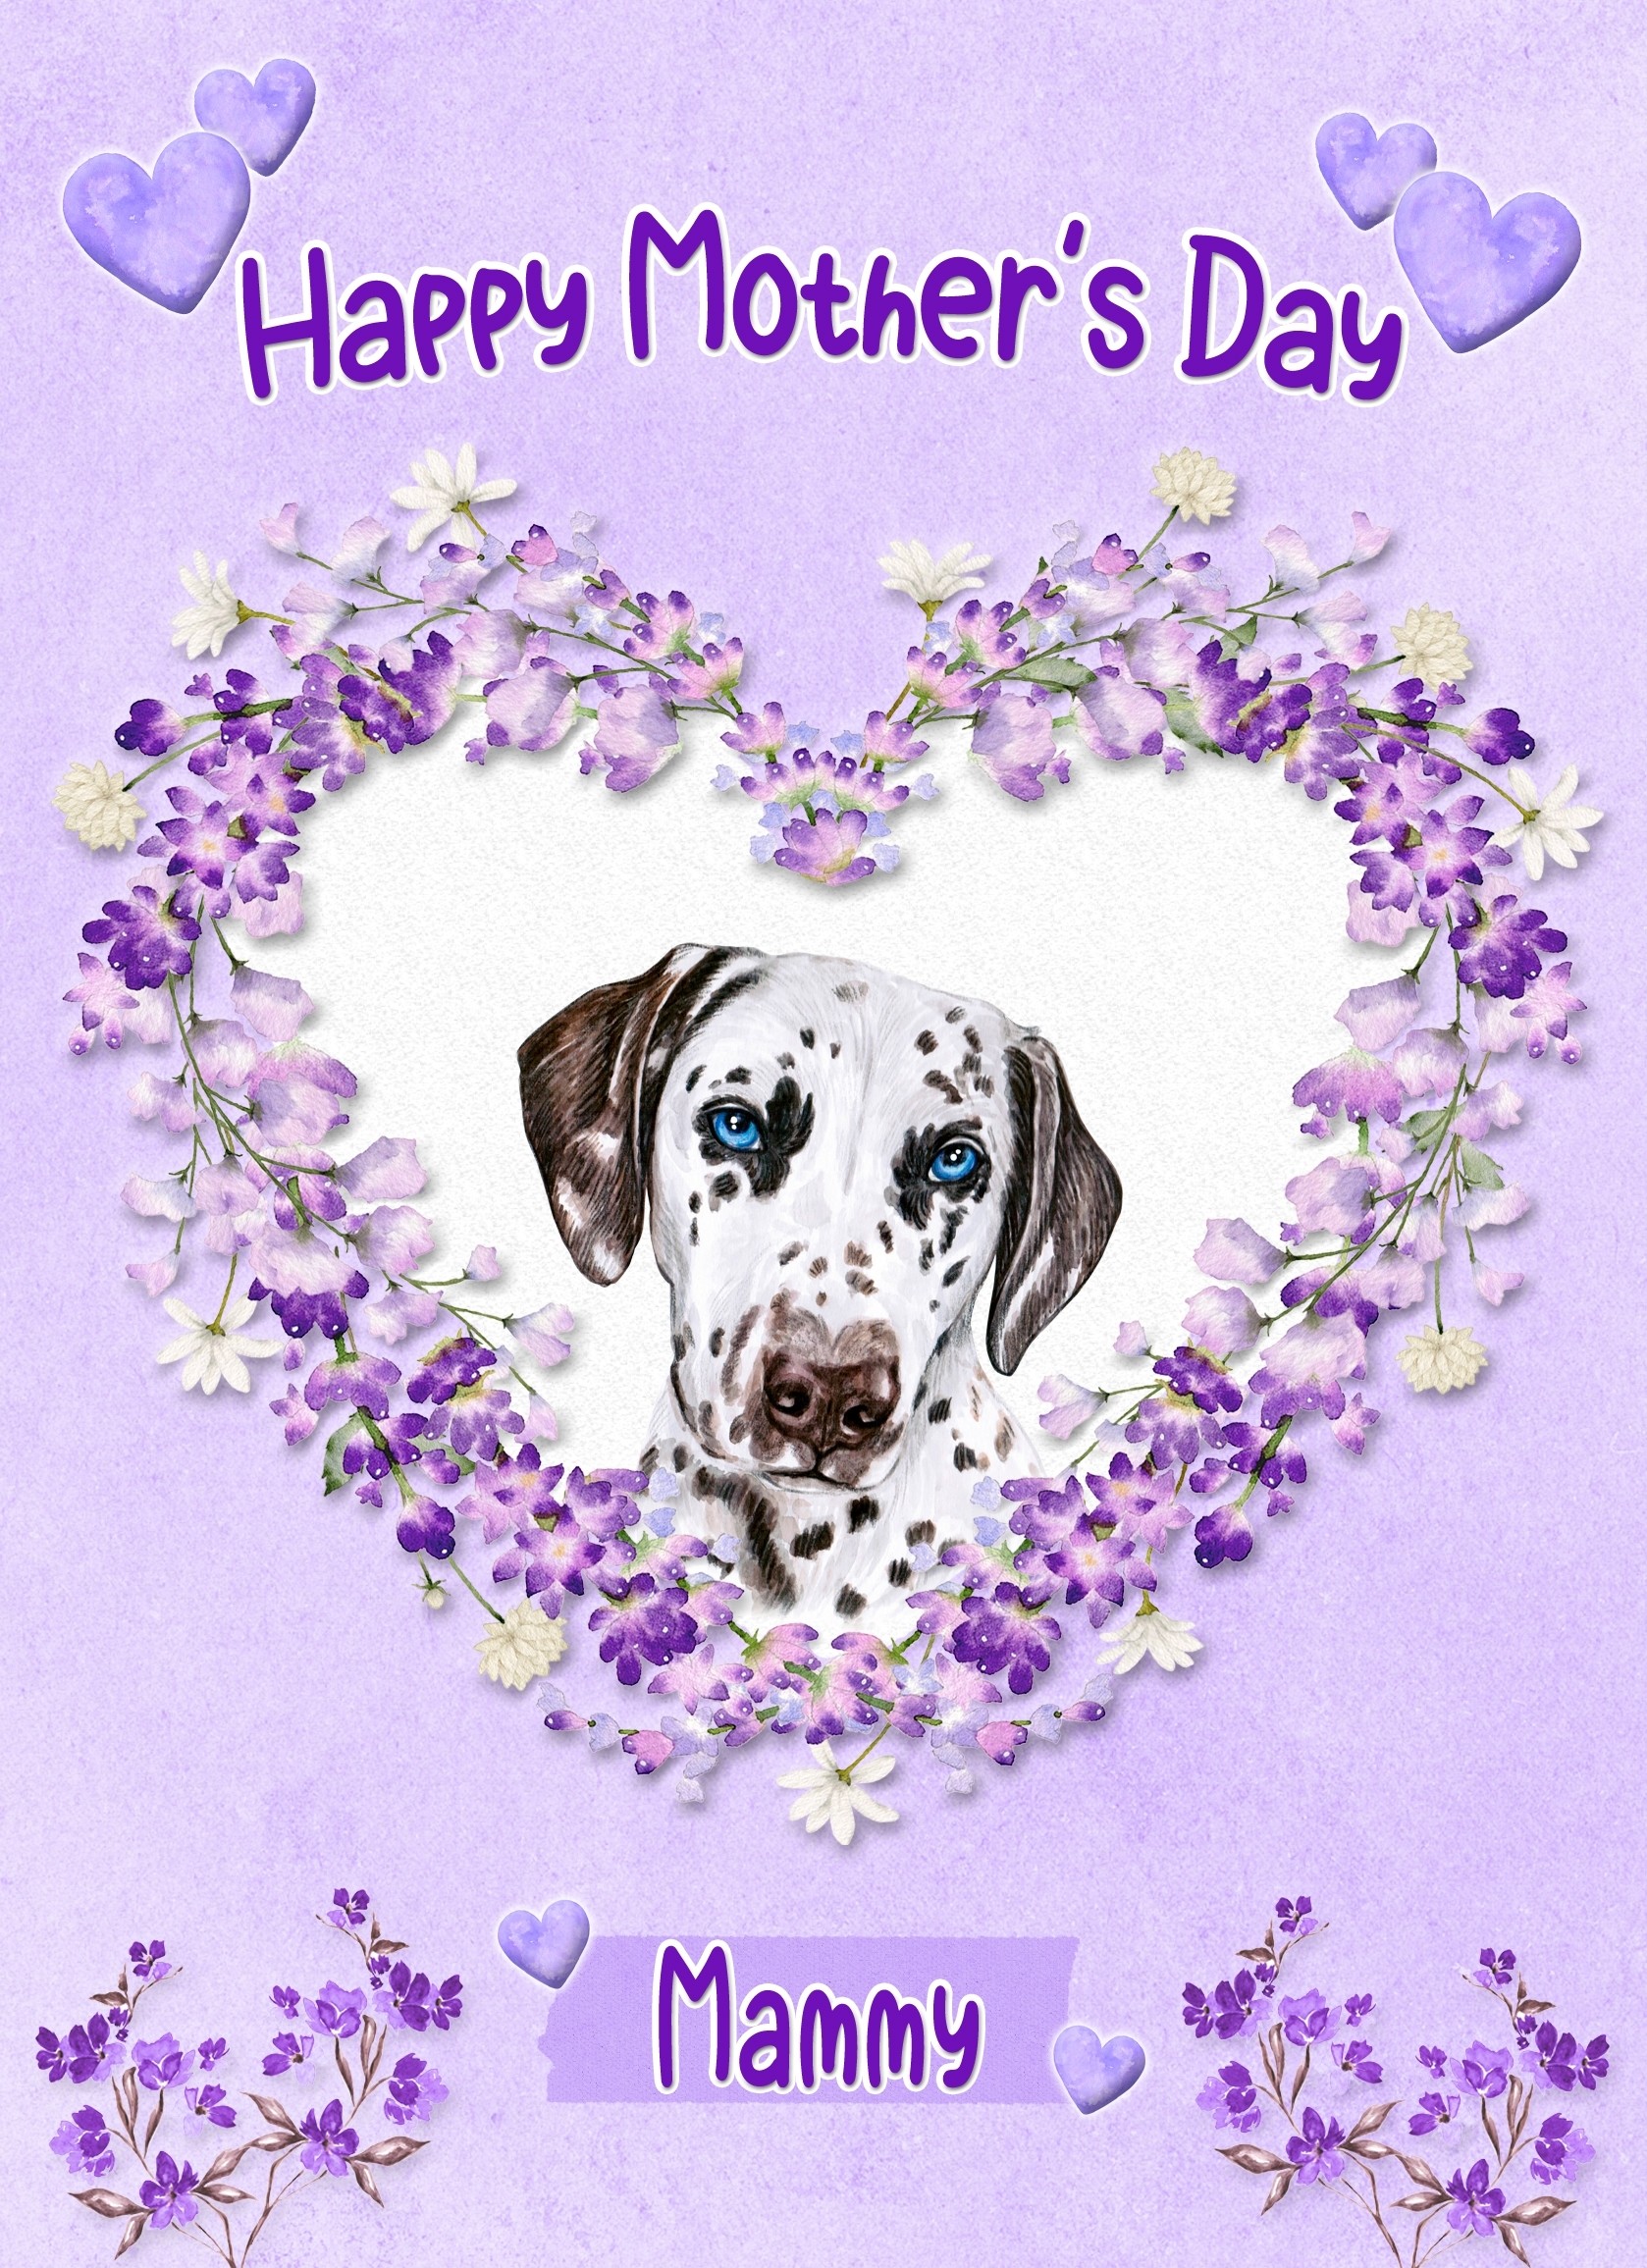 Dalmatian Dog Mothers Day Card (Happy Mothers, Mammy)